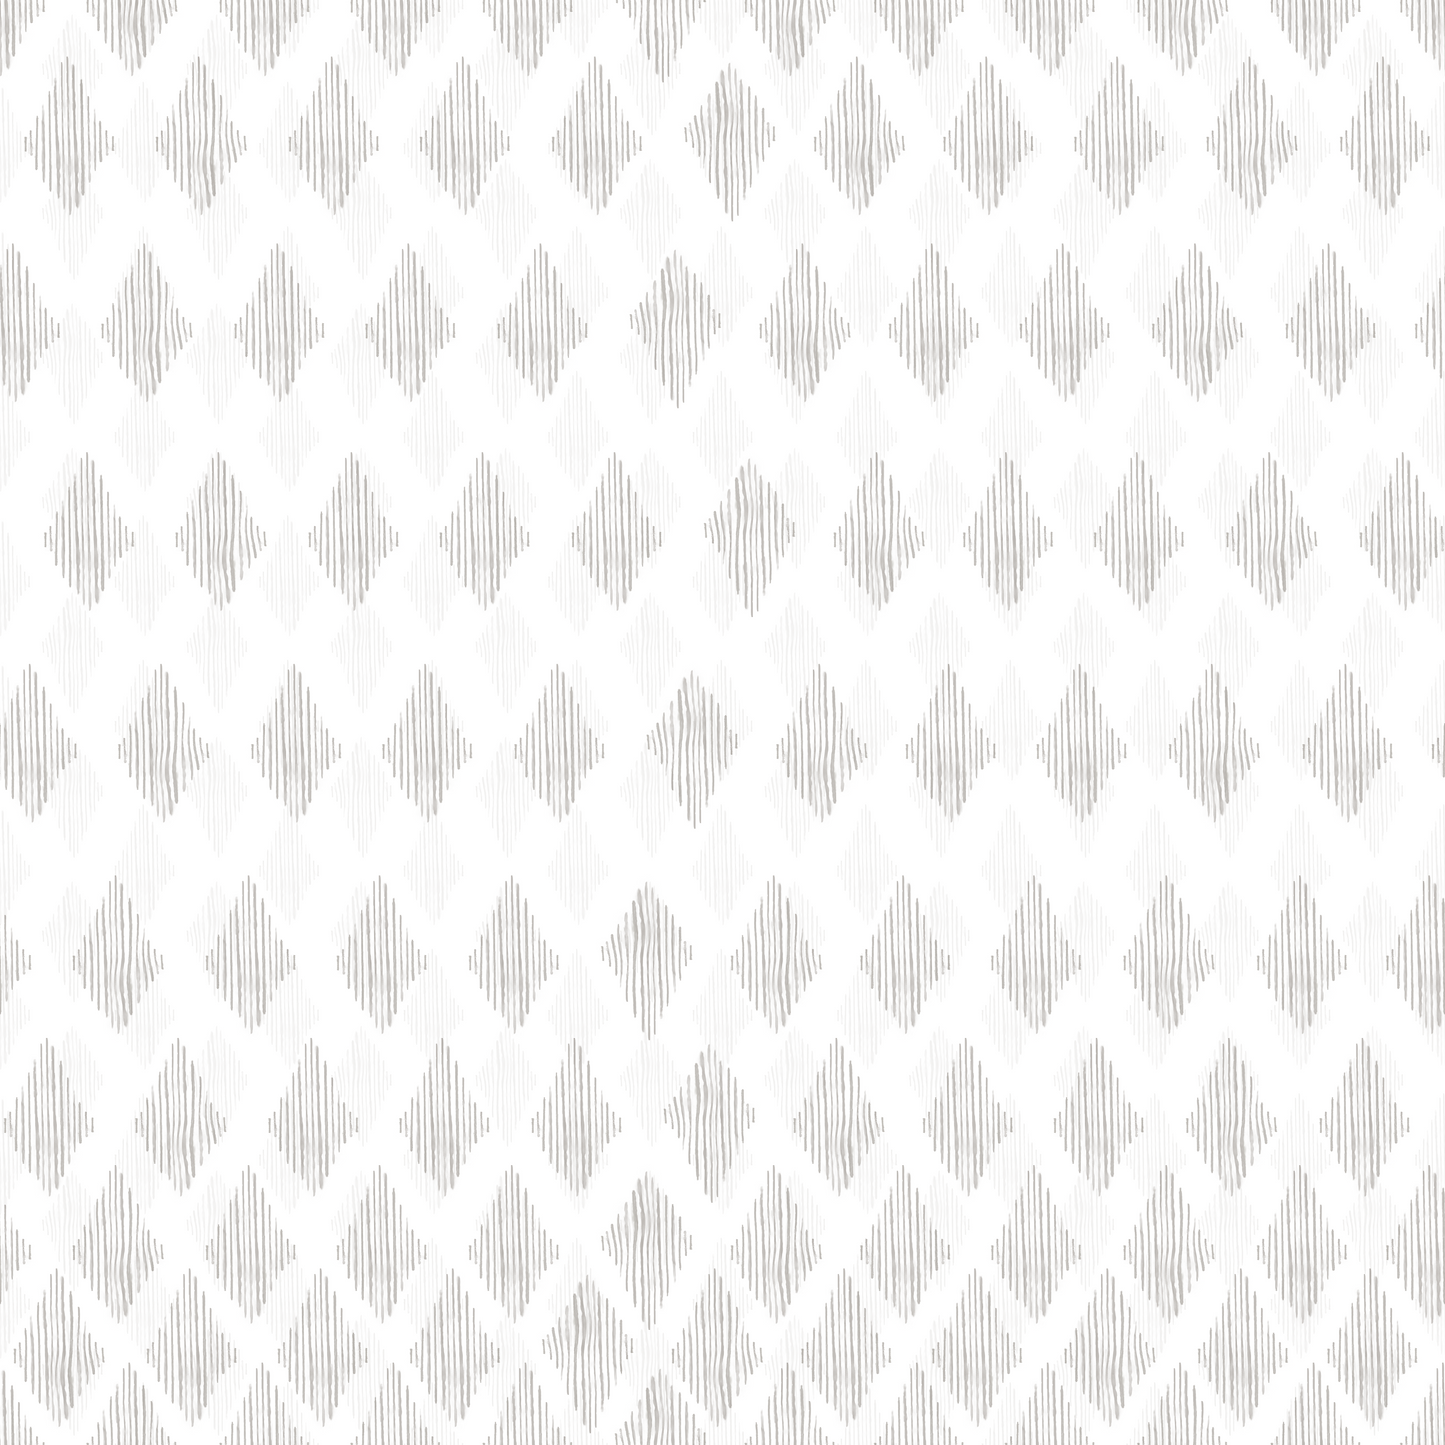 Grey/Gray small boho diamonds on white background easy to install and remove peel and stick custom wallpaper available in different lengths/sizes locally created and printed in Canada. Removable, washable, durable, commercial grade, customizable and water proof.